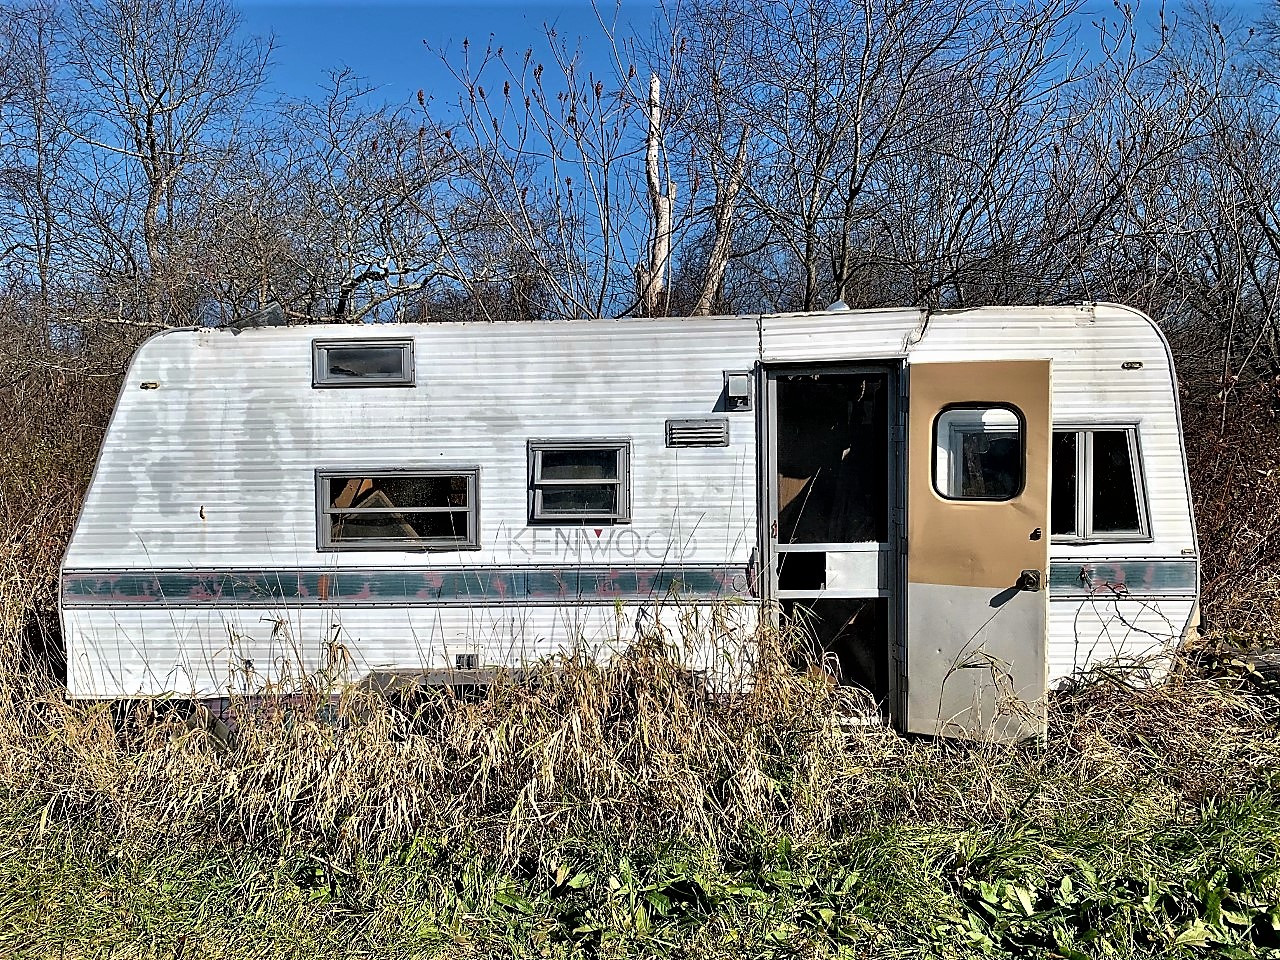 "Camper" by Gregory K. Clary